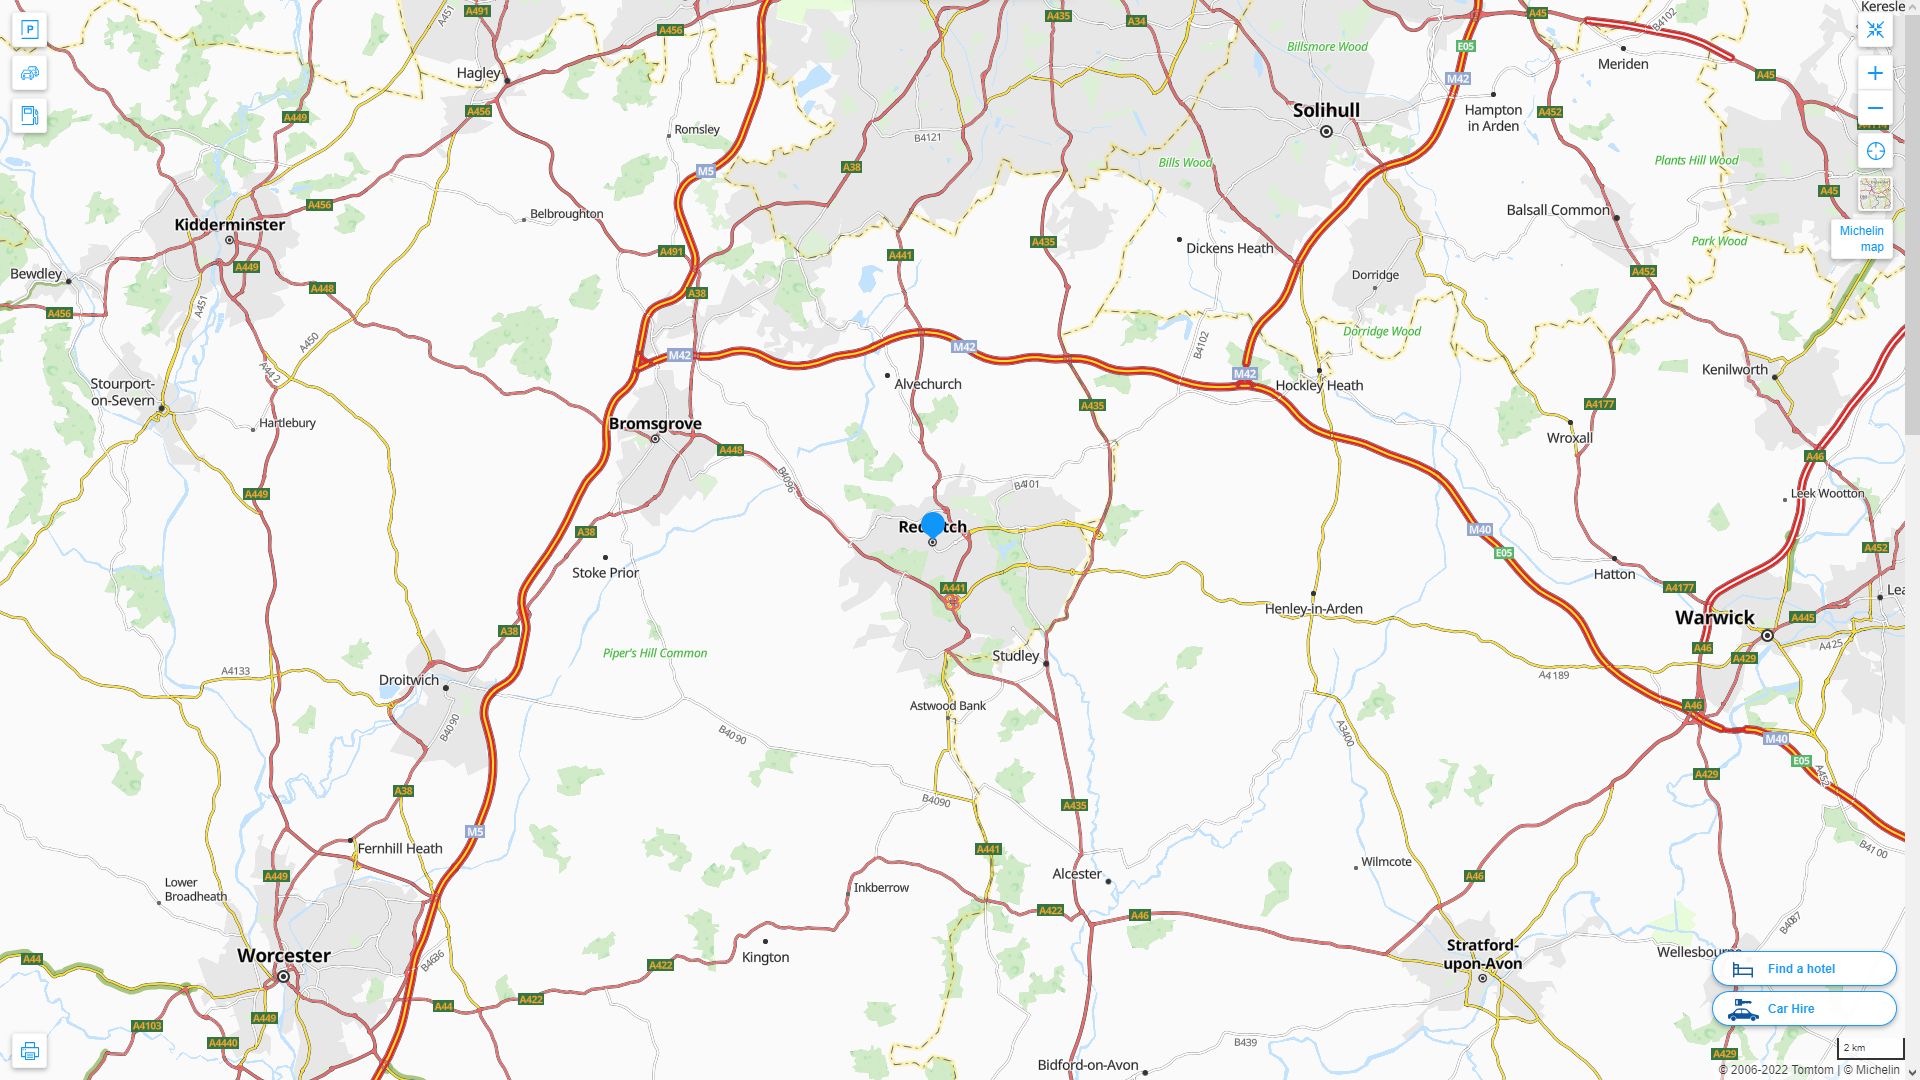 Redditch Highway and Road Map